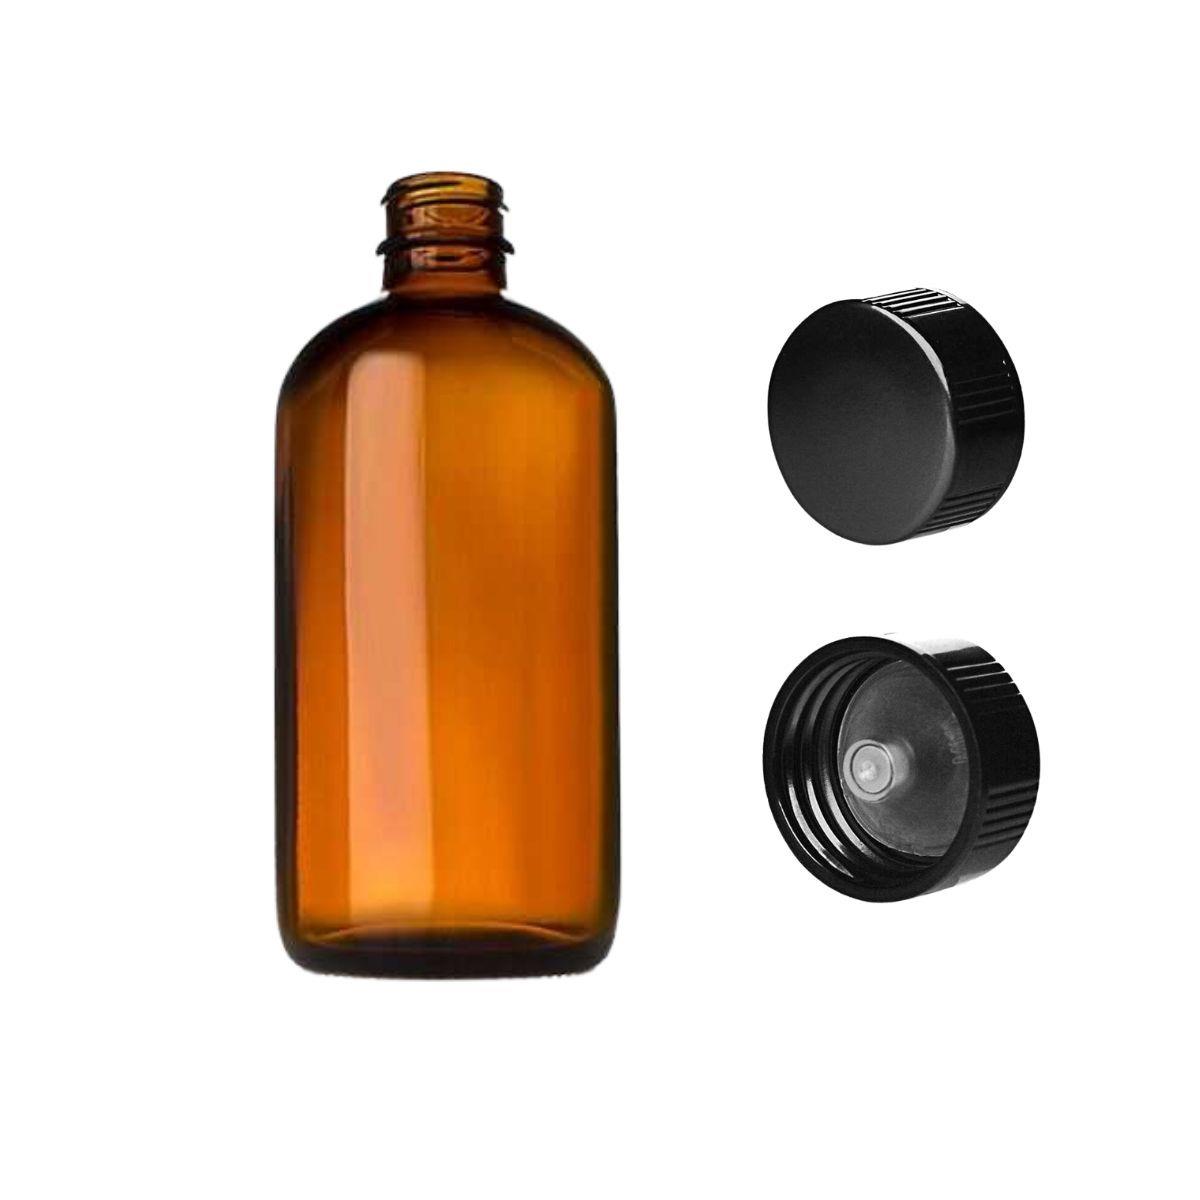 8 oz Amber Glass Bottle with Cap